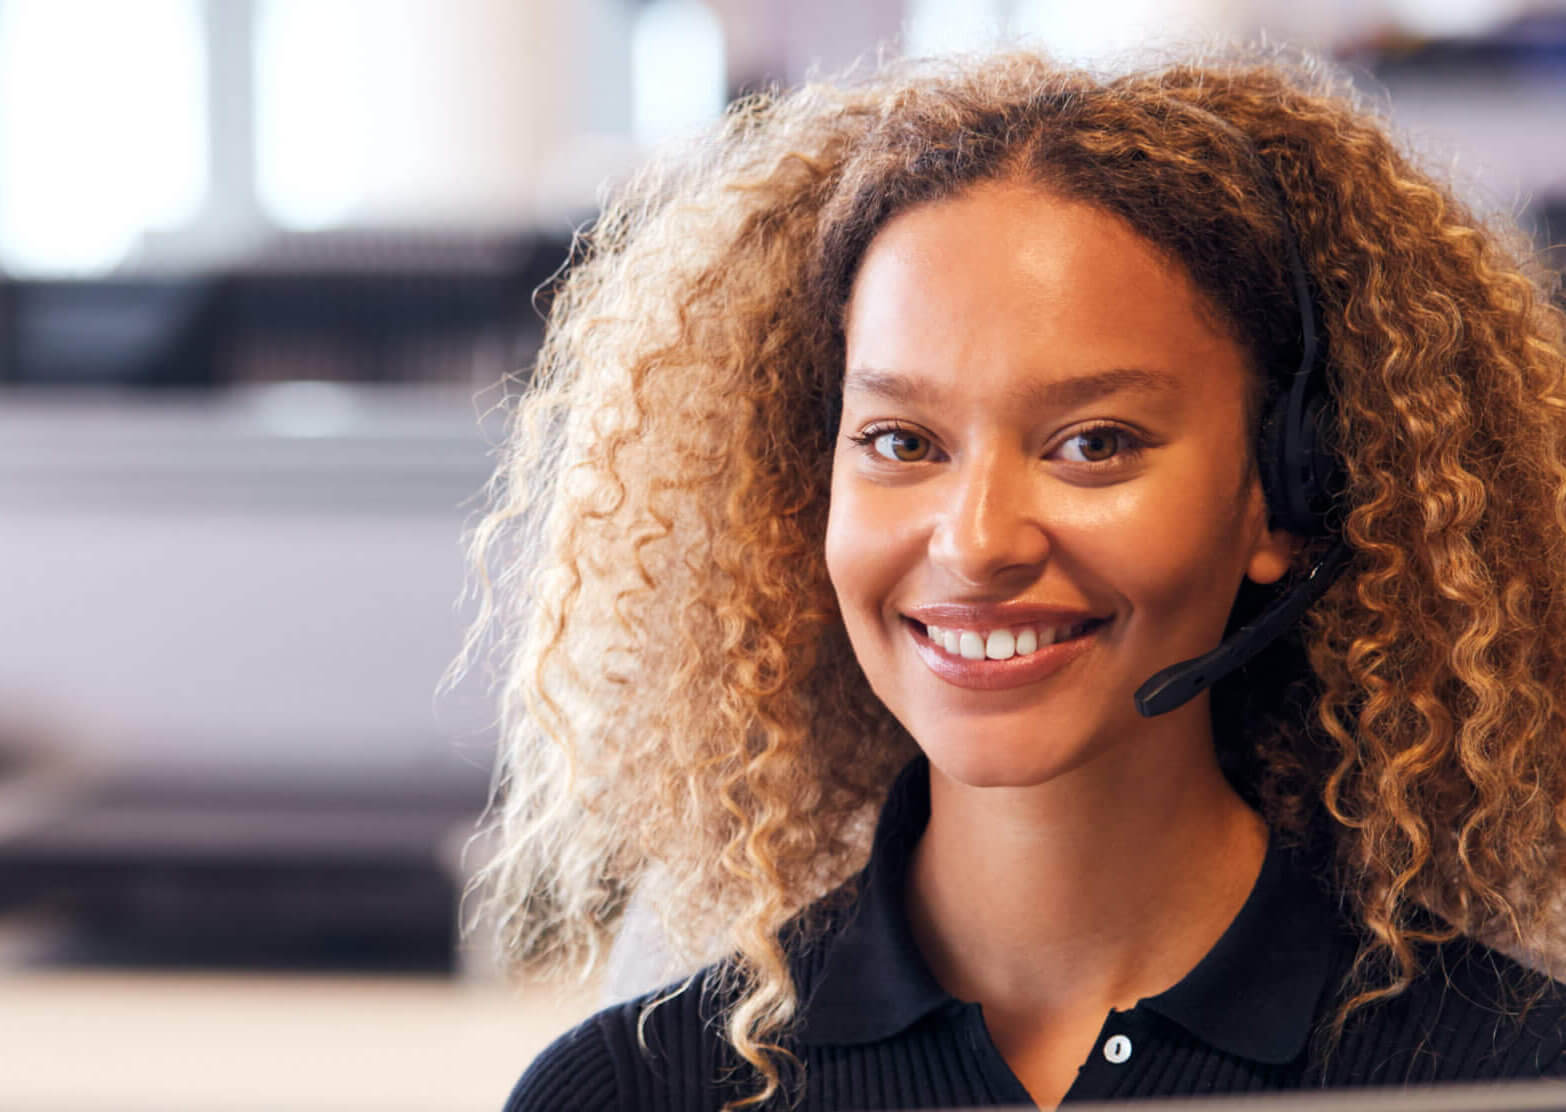 Female customer service worker smiling and wearing a headset